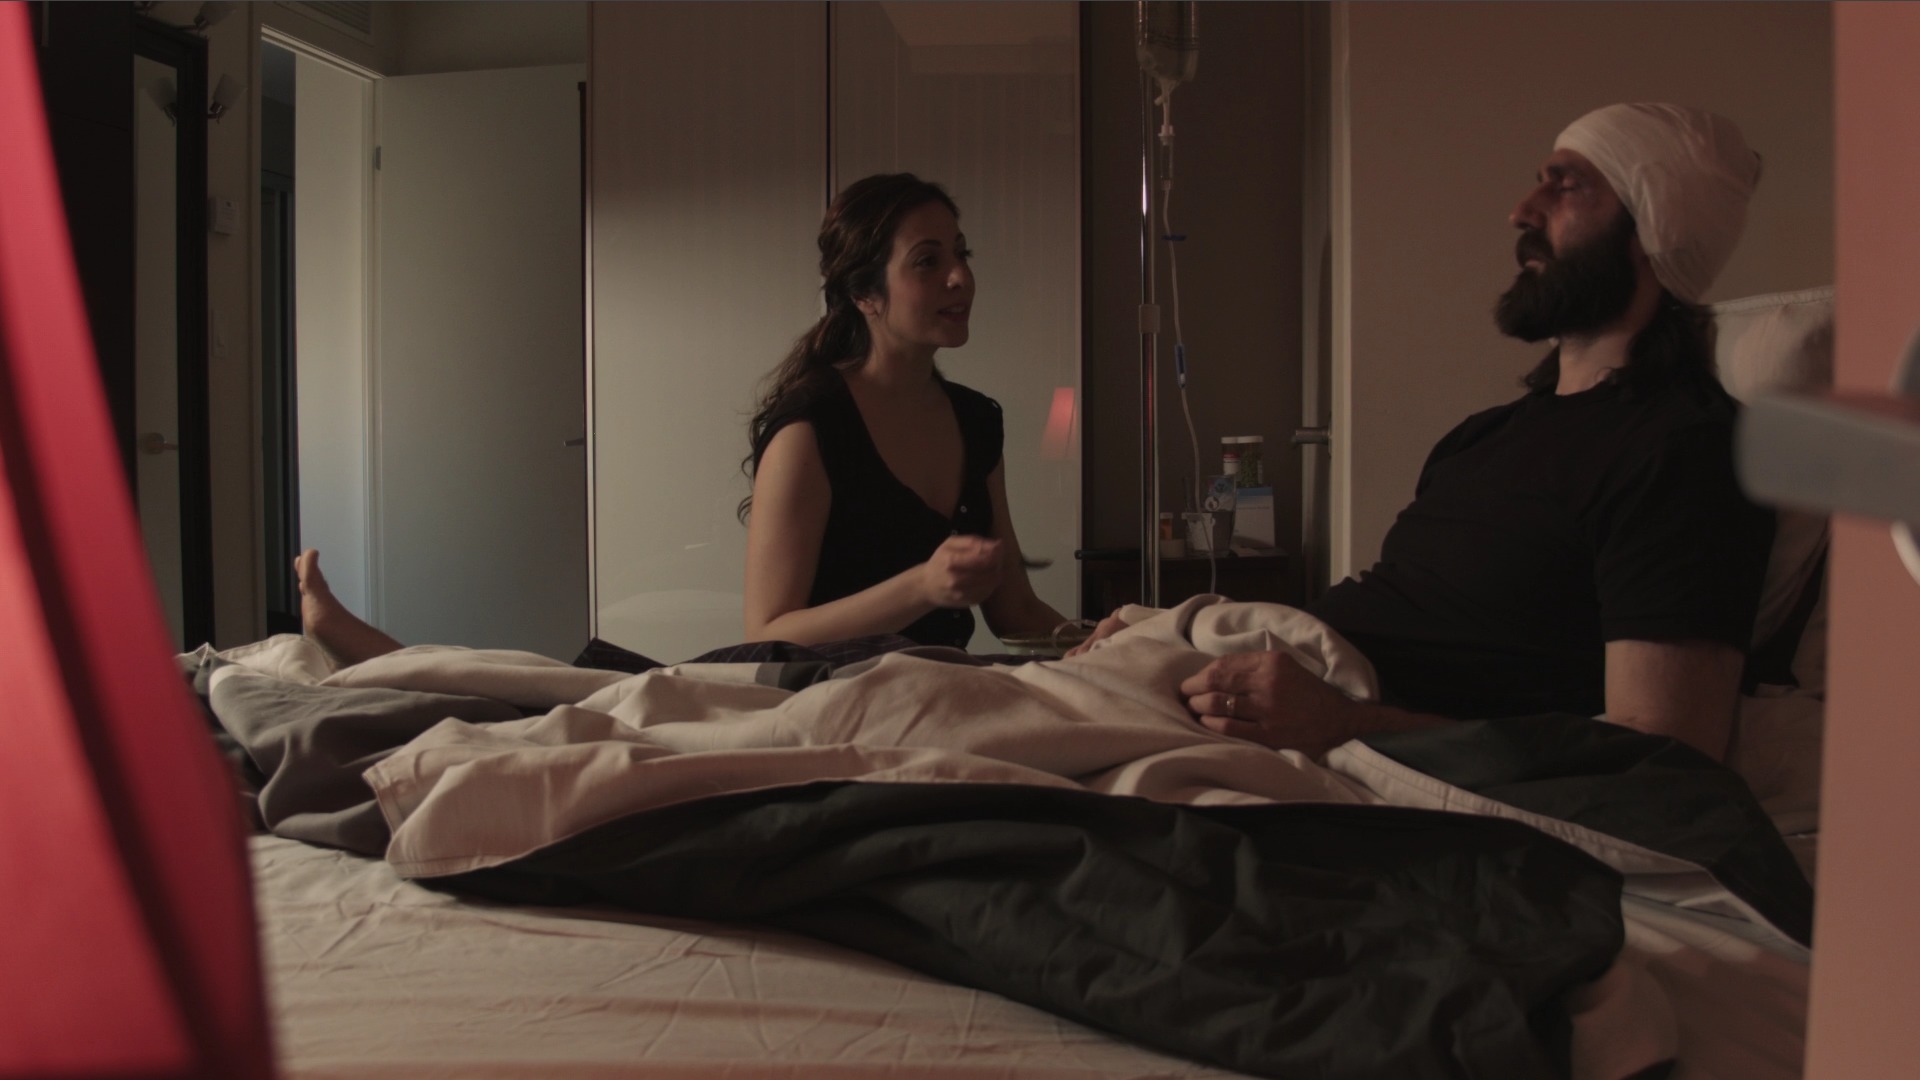 Film still from LUCIFEROUS with Mahsa Ghorbankarimi and Alexander Gorelick. (2015)